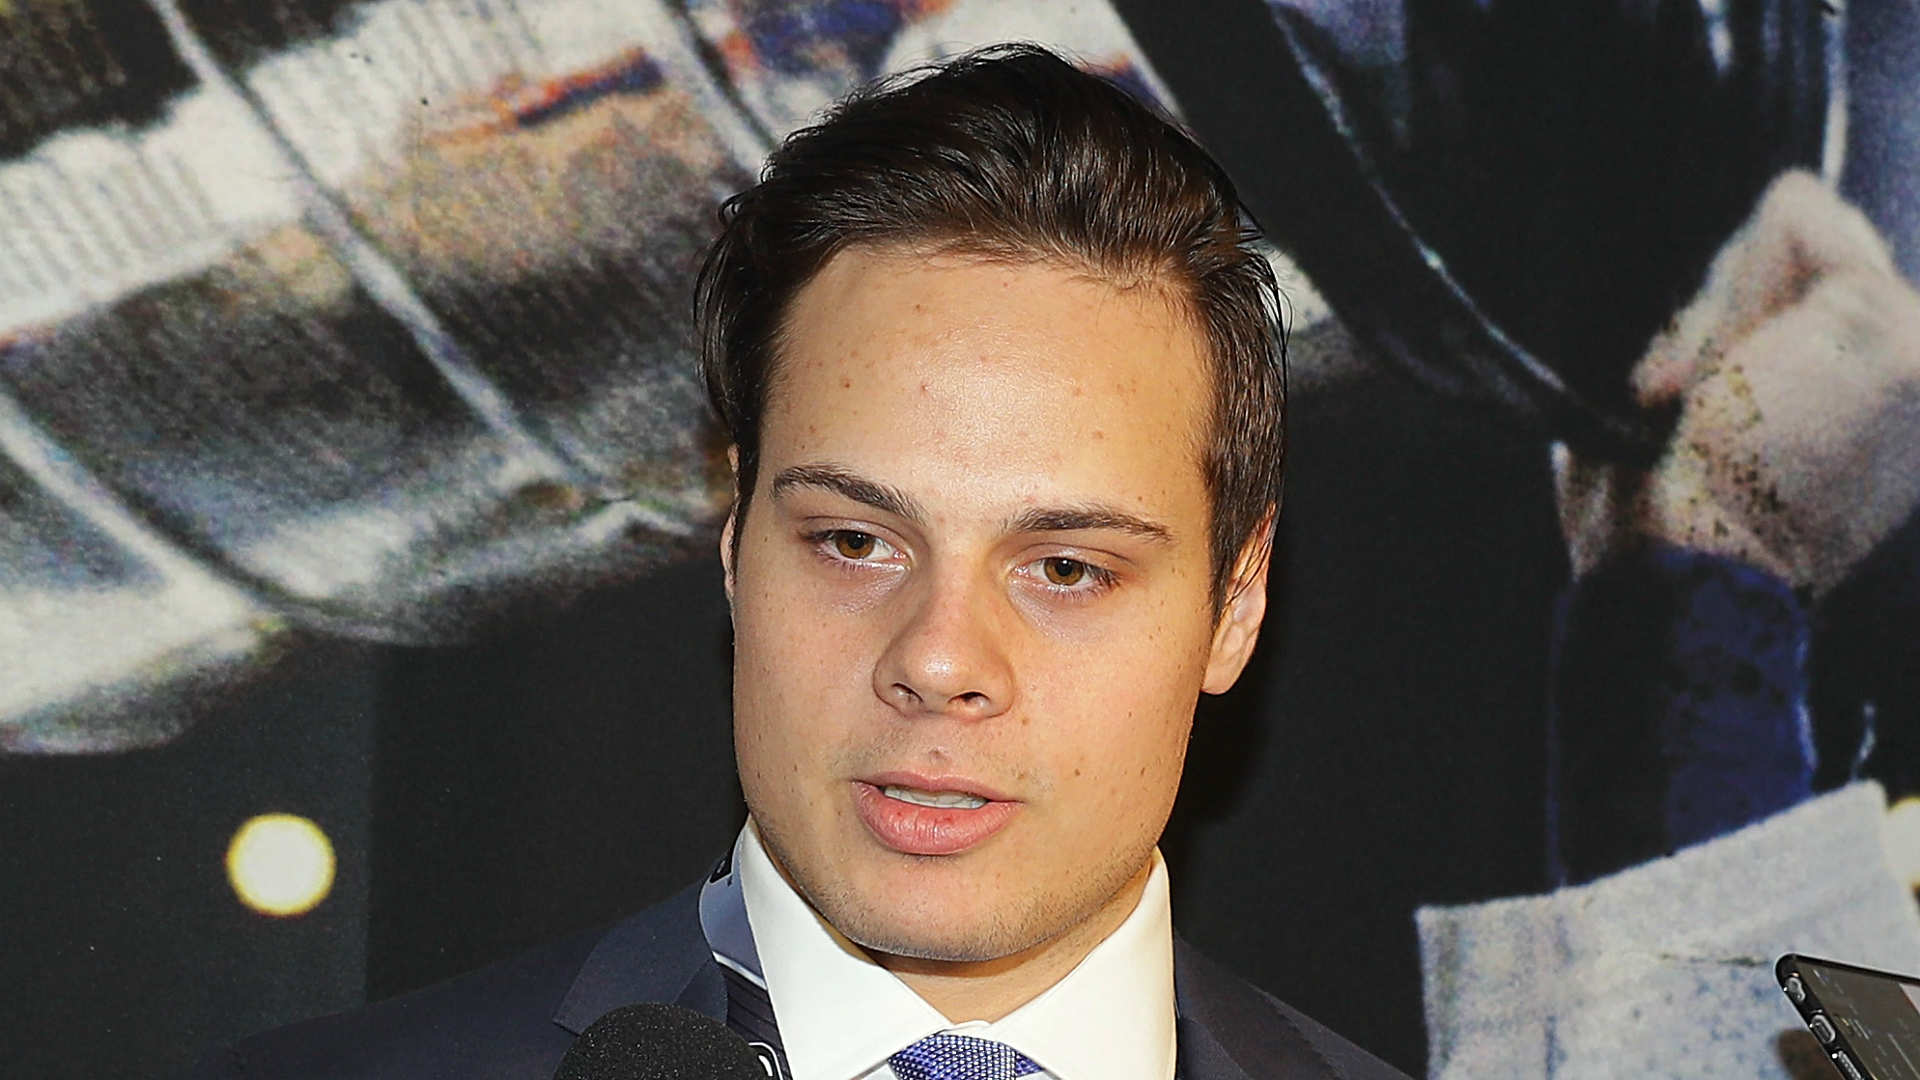 Leafs select Auston Matthews with No. 1 pick in NHL draft - The Globe and  Mail